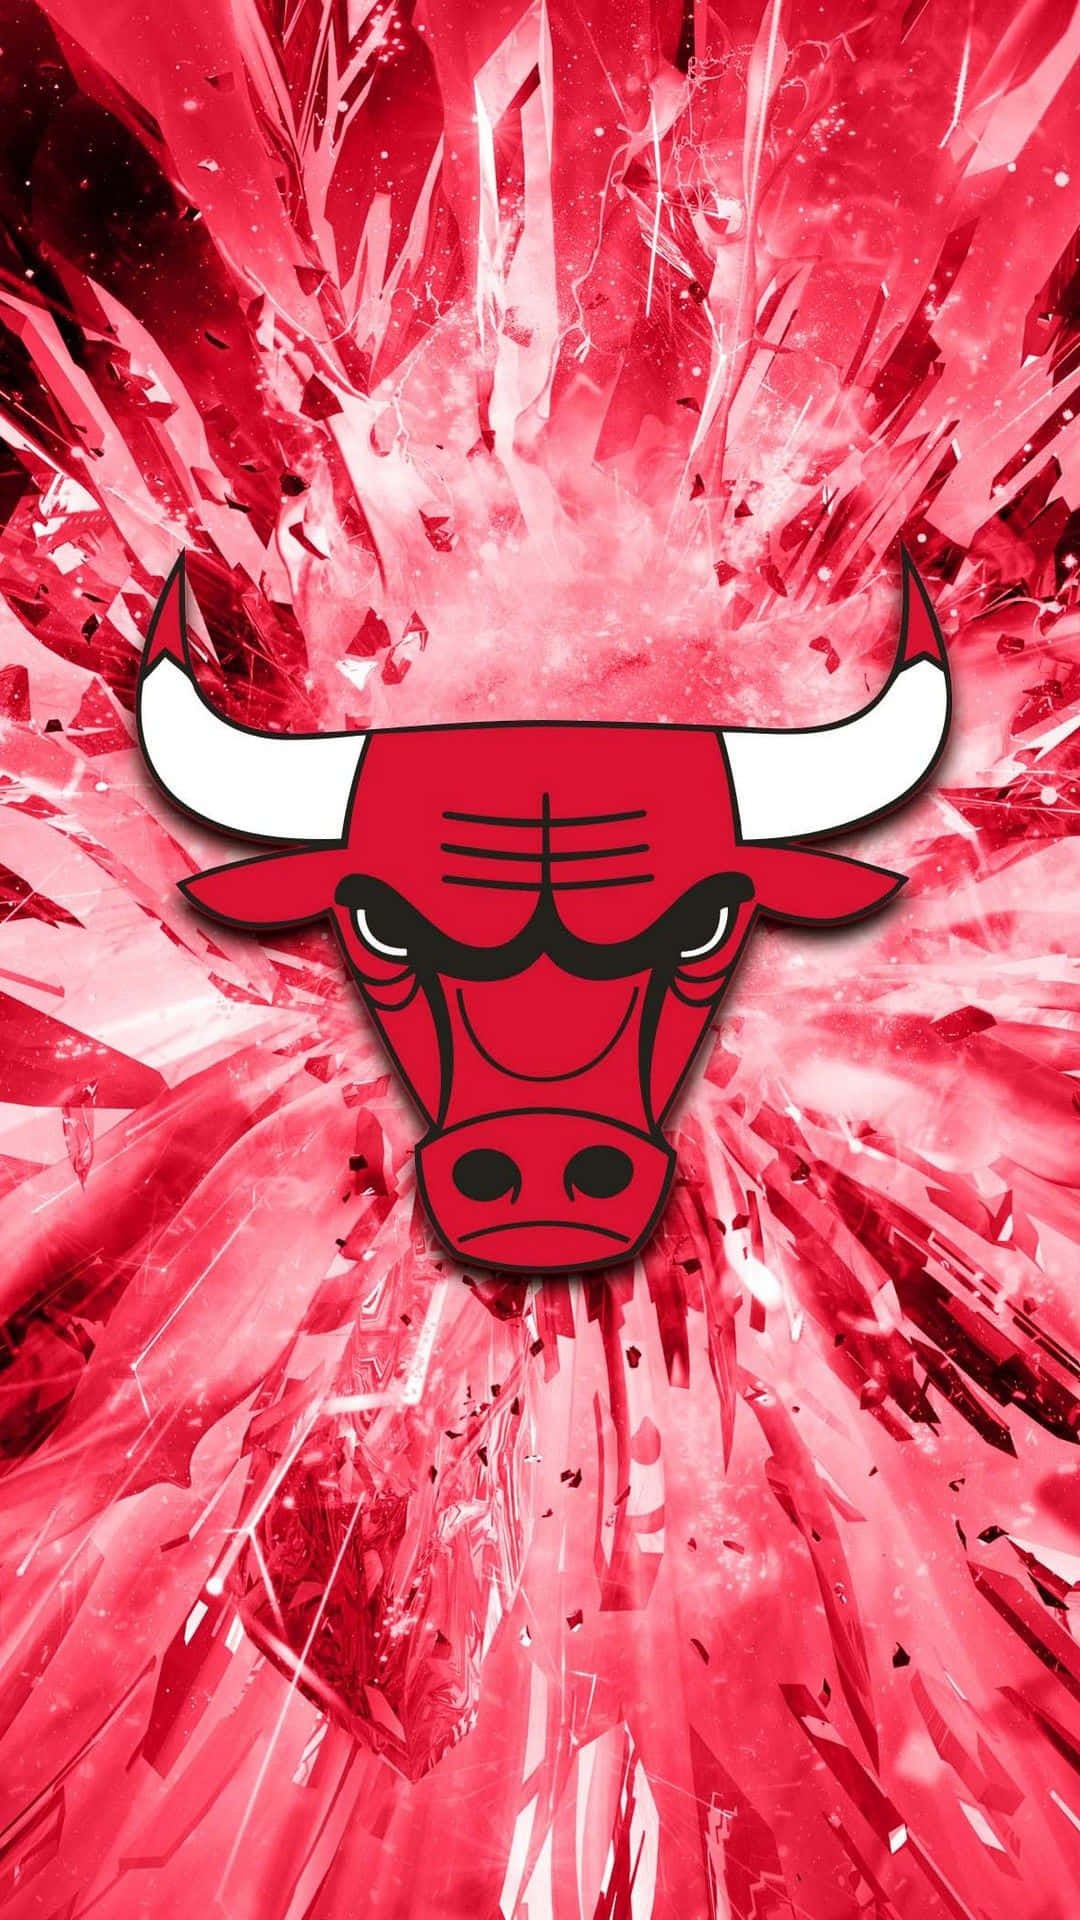 Stay Up To Date On Chicago Bulls News With This Iphone Background